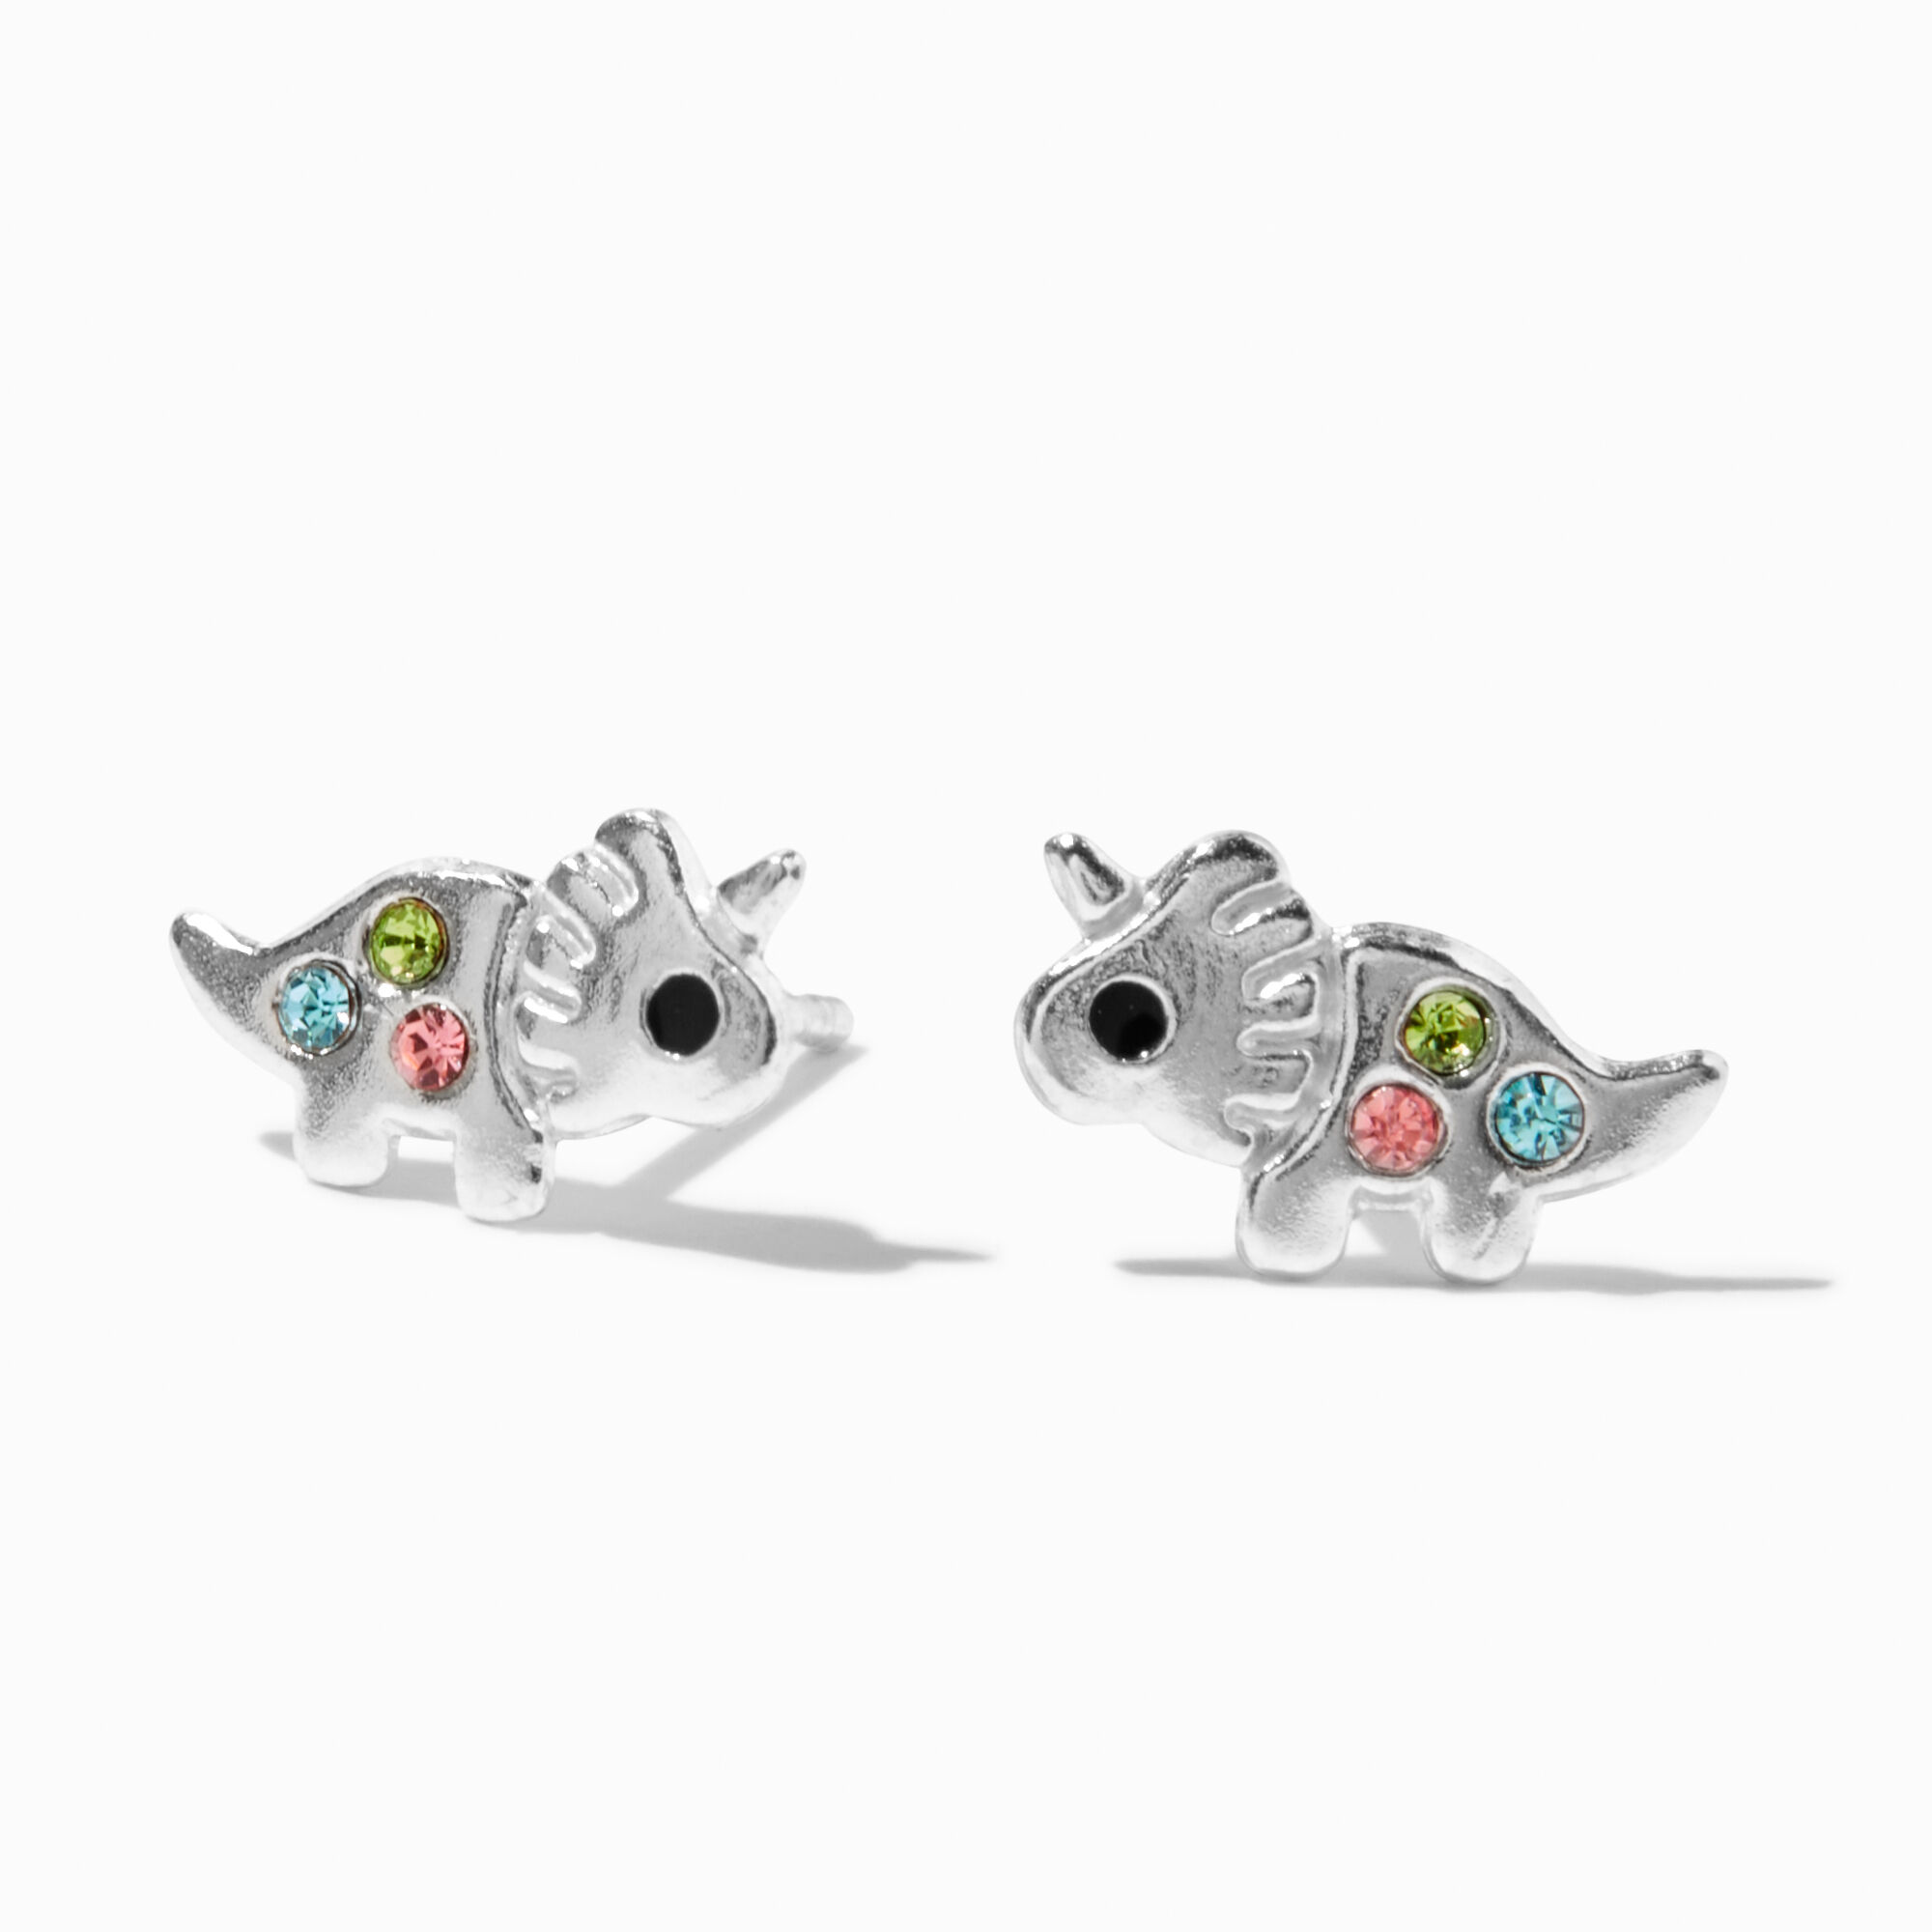 View Claires Embellished Stegosaurus Dinosaur Stud Earrings Silver information